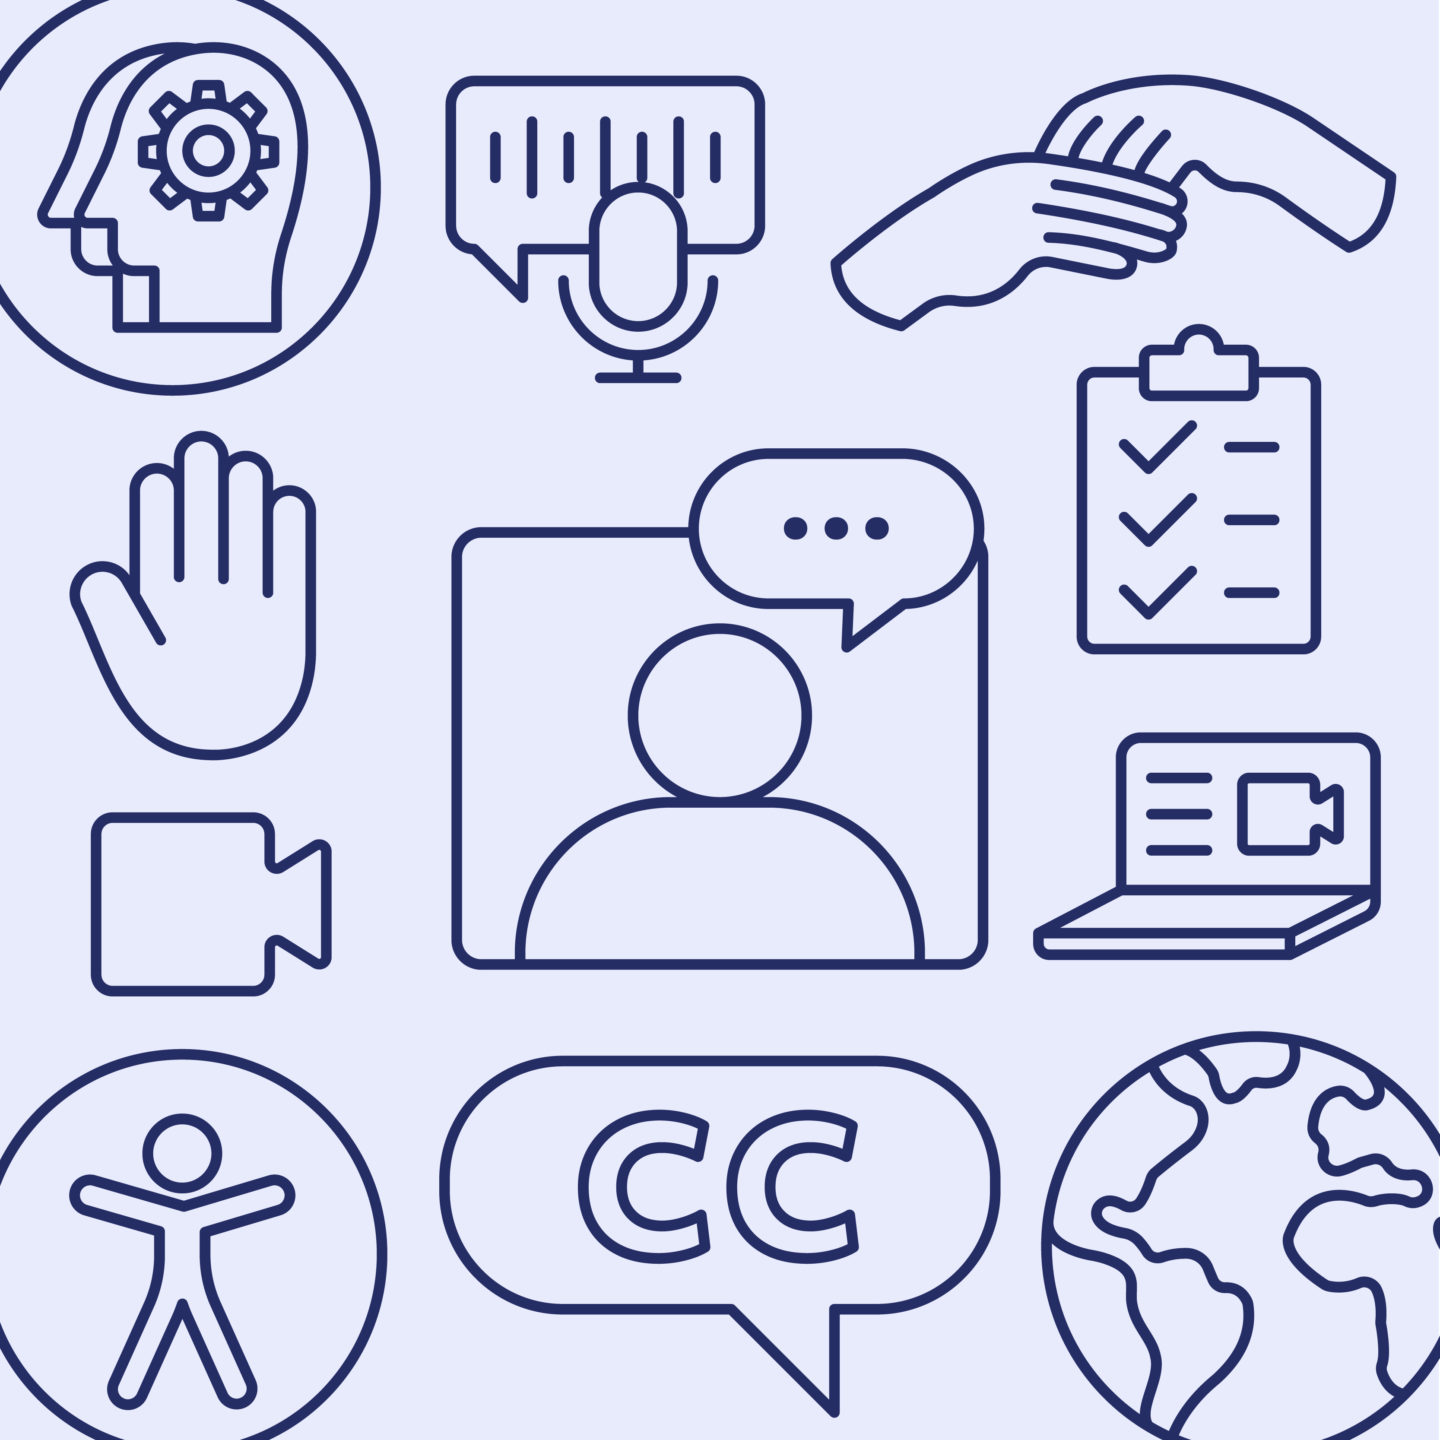 Various accessibility icons against light blue background